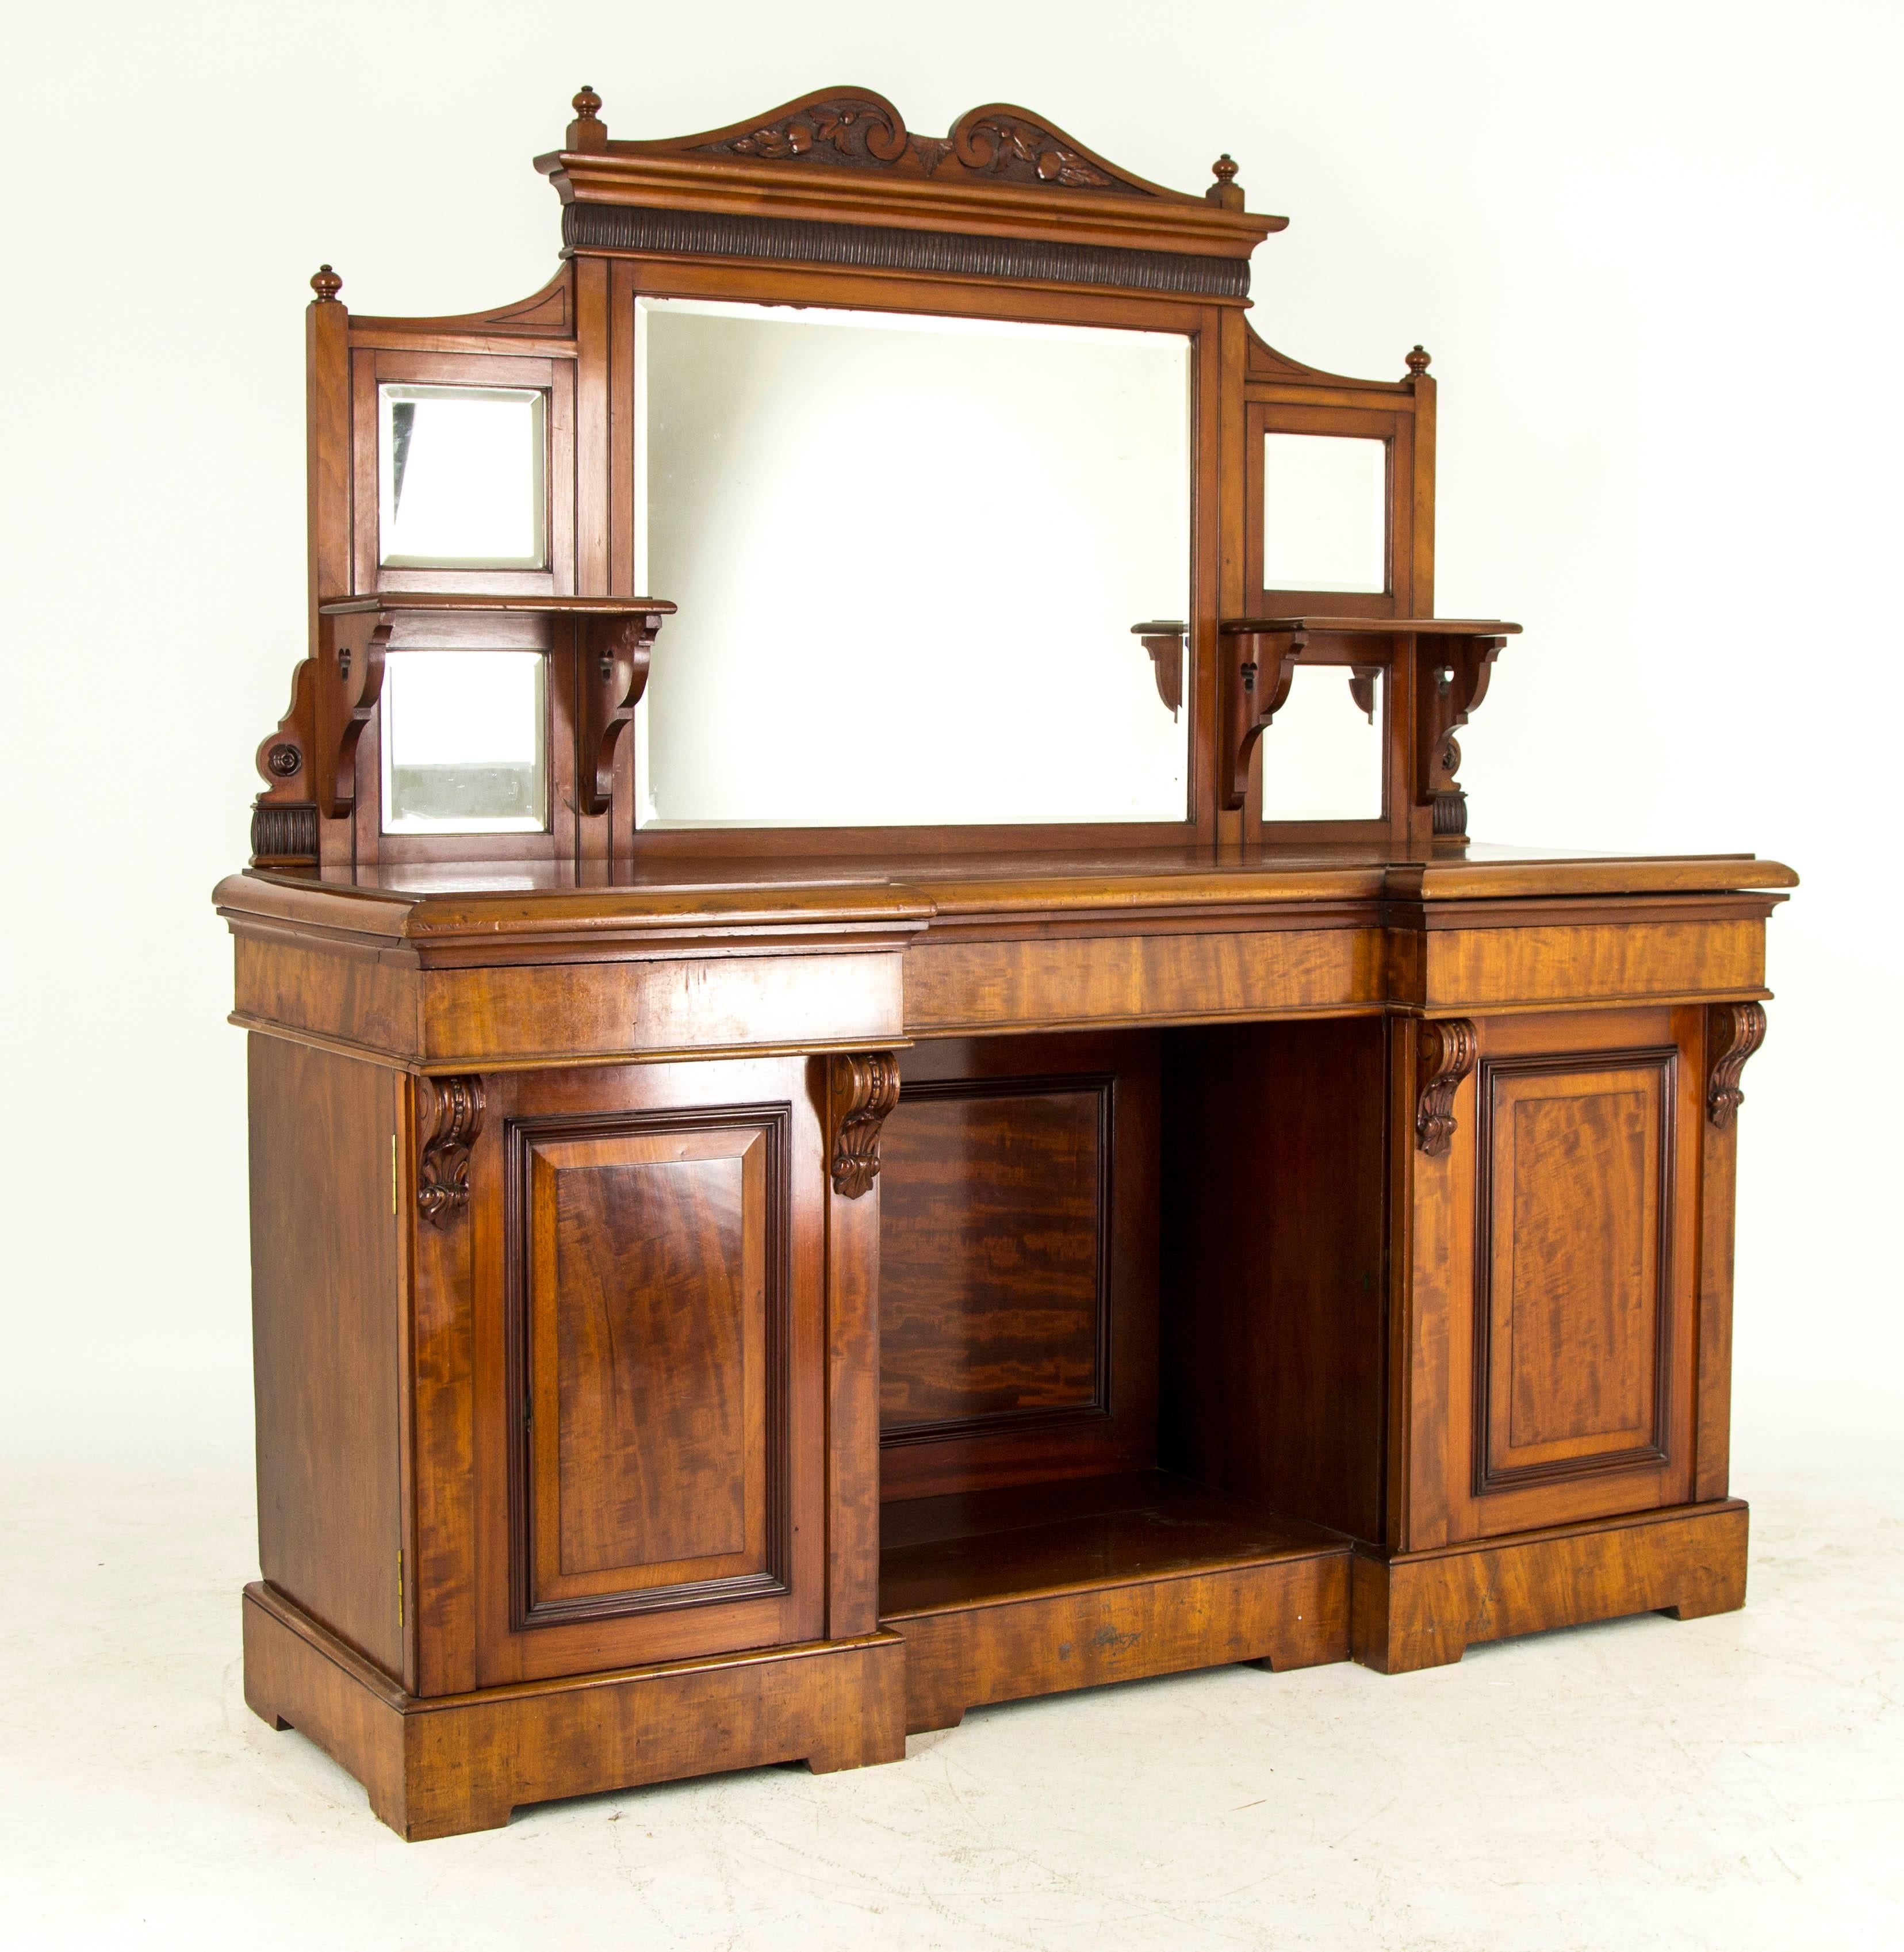 Scotland 
1870
Solid Walnut and mahogany veneers
Original finish
Carved pediment above
Large central beveled mirror
Flanked by two carved shelves with beveled mirror above and below
Inverted top above three drawers
Two cupboards below with fitted